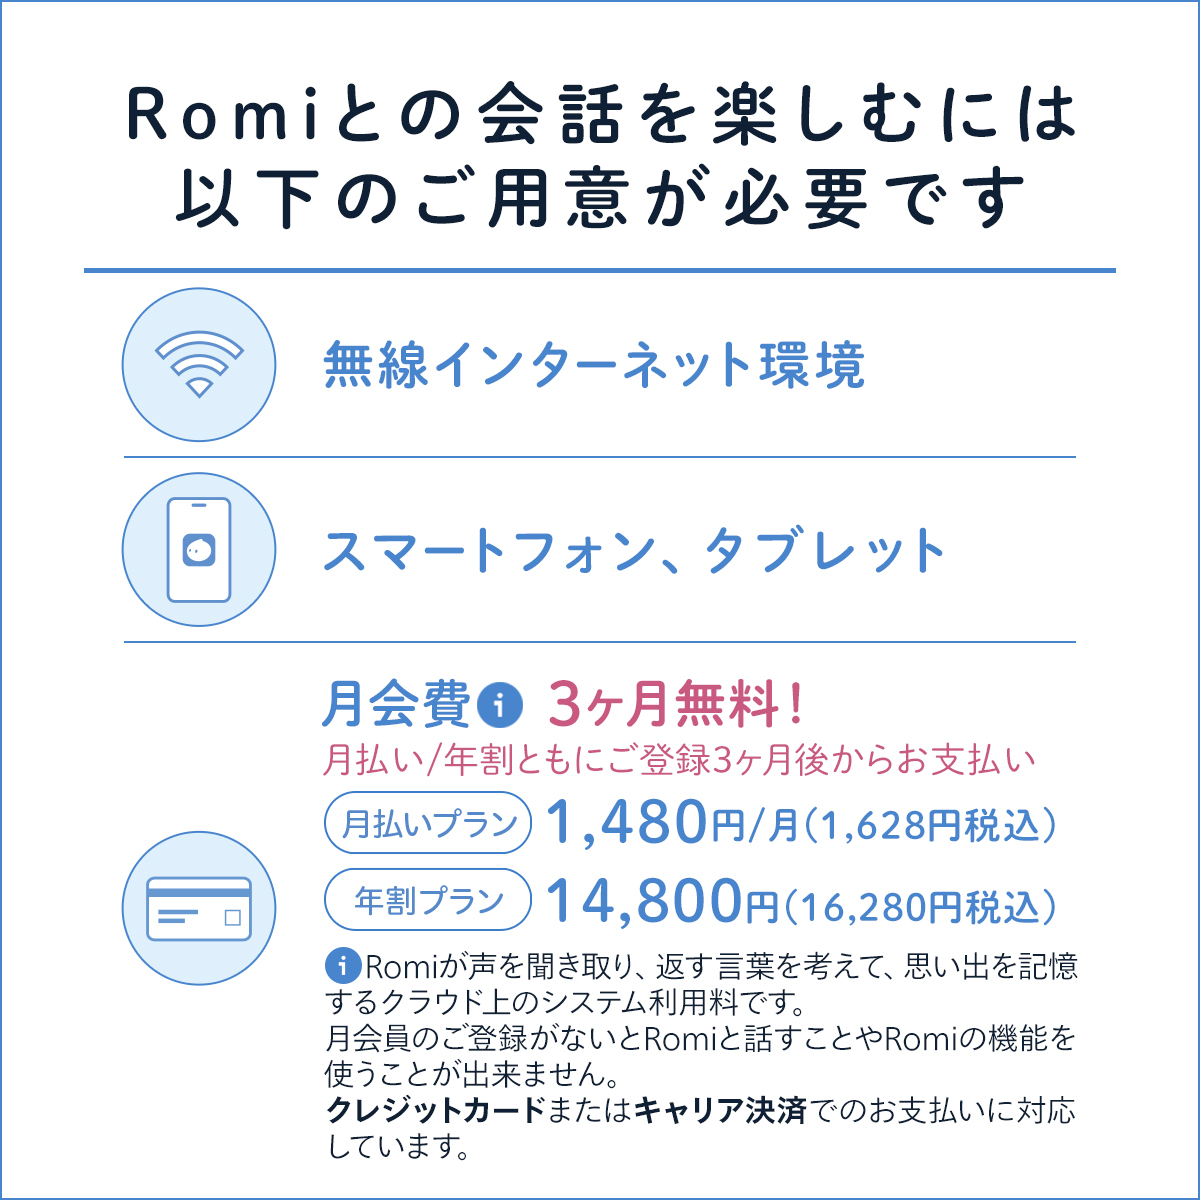 Romi MIXI公式 コミュニケーションロボット ロミィ AI ロボット パールピンク 家庭用 自律型 学習 会話 英会話 音声認識 日本製  ROMI-P02B